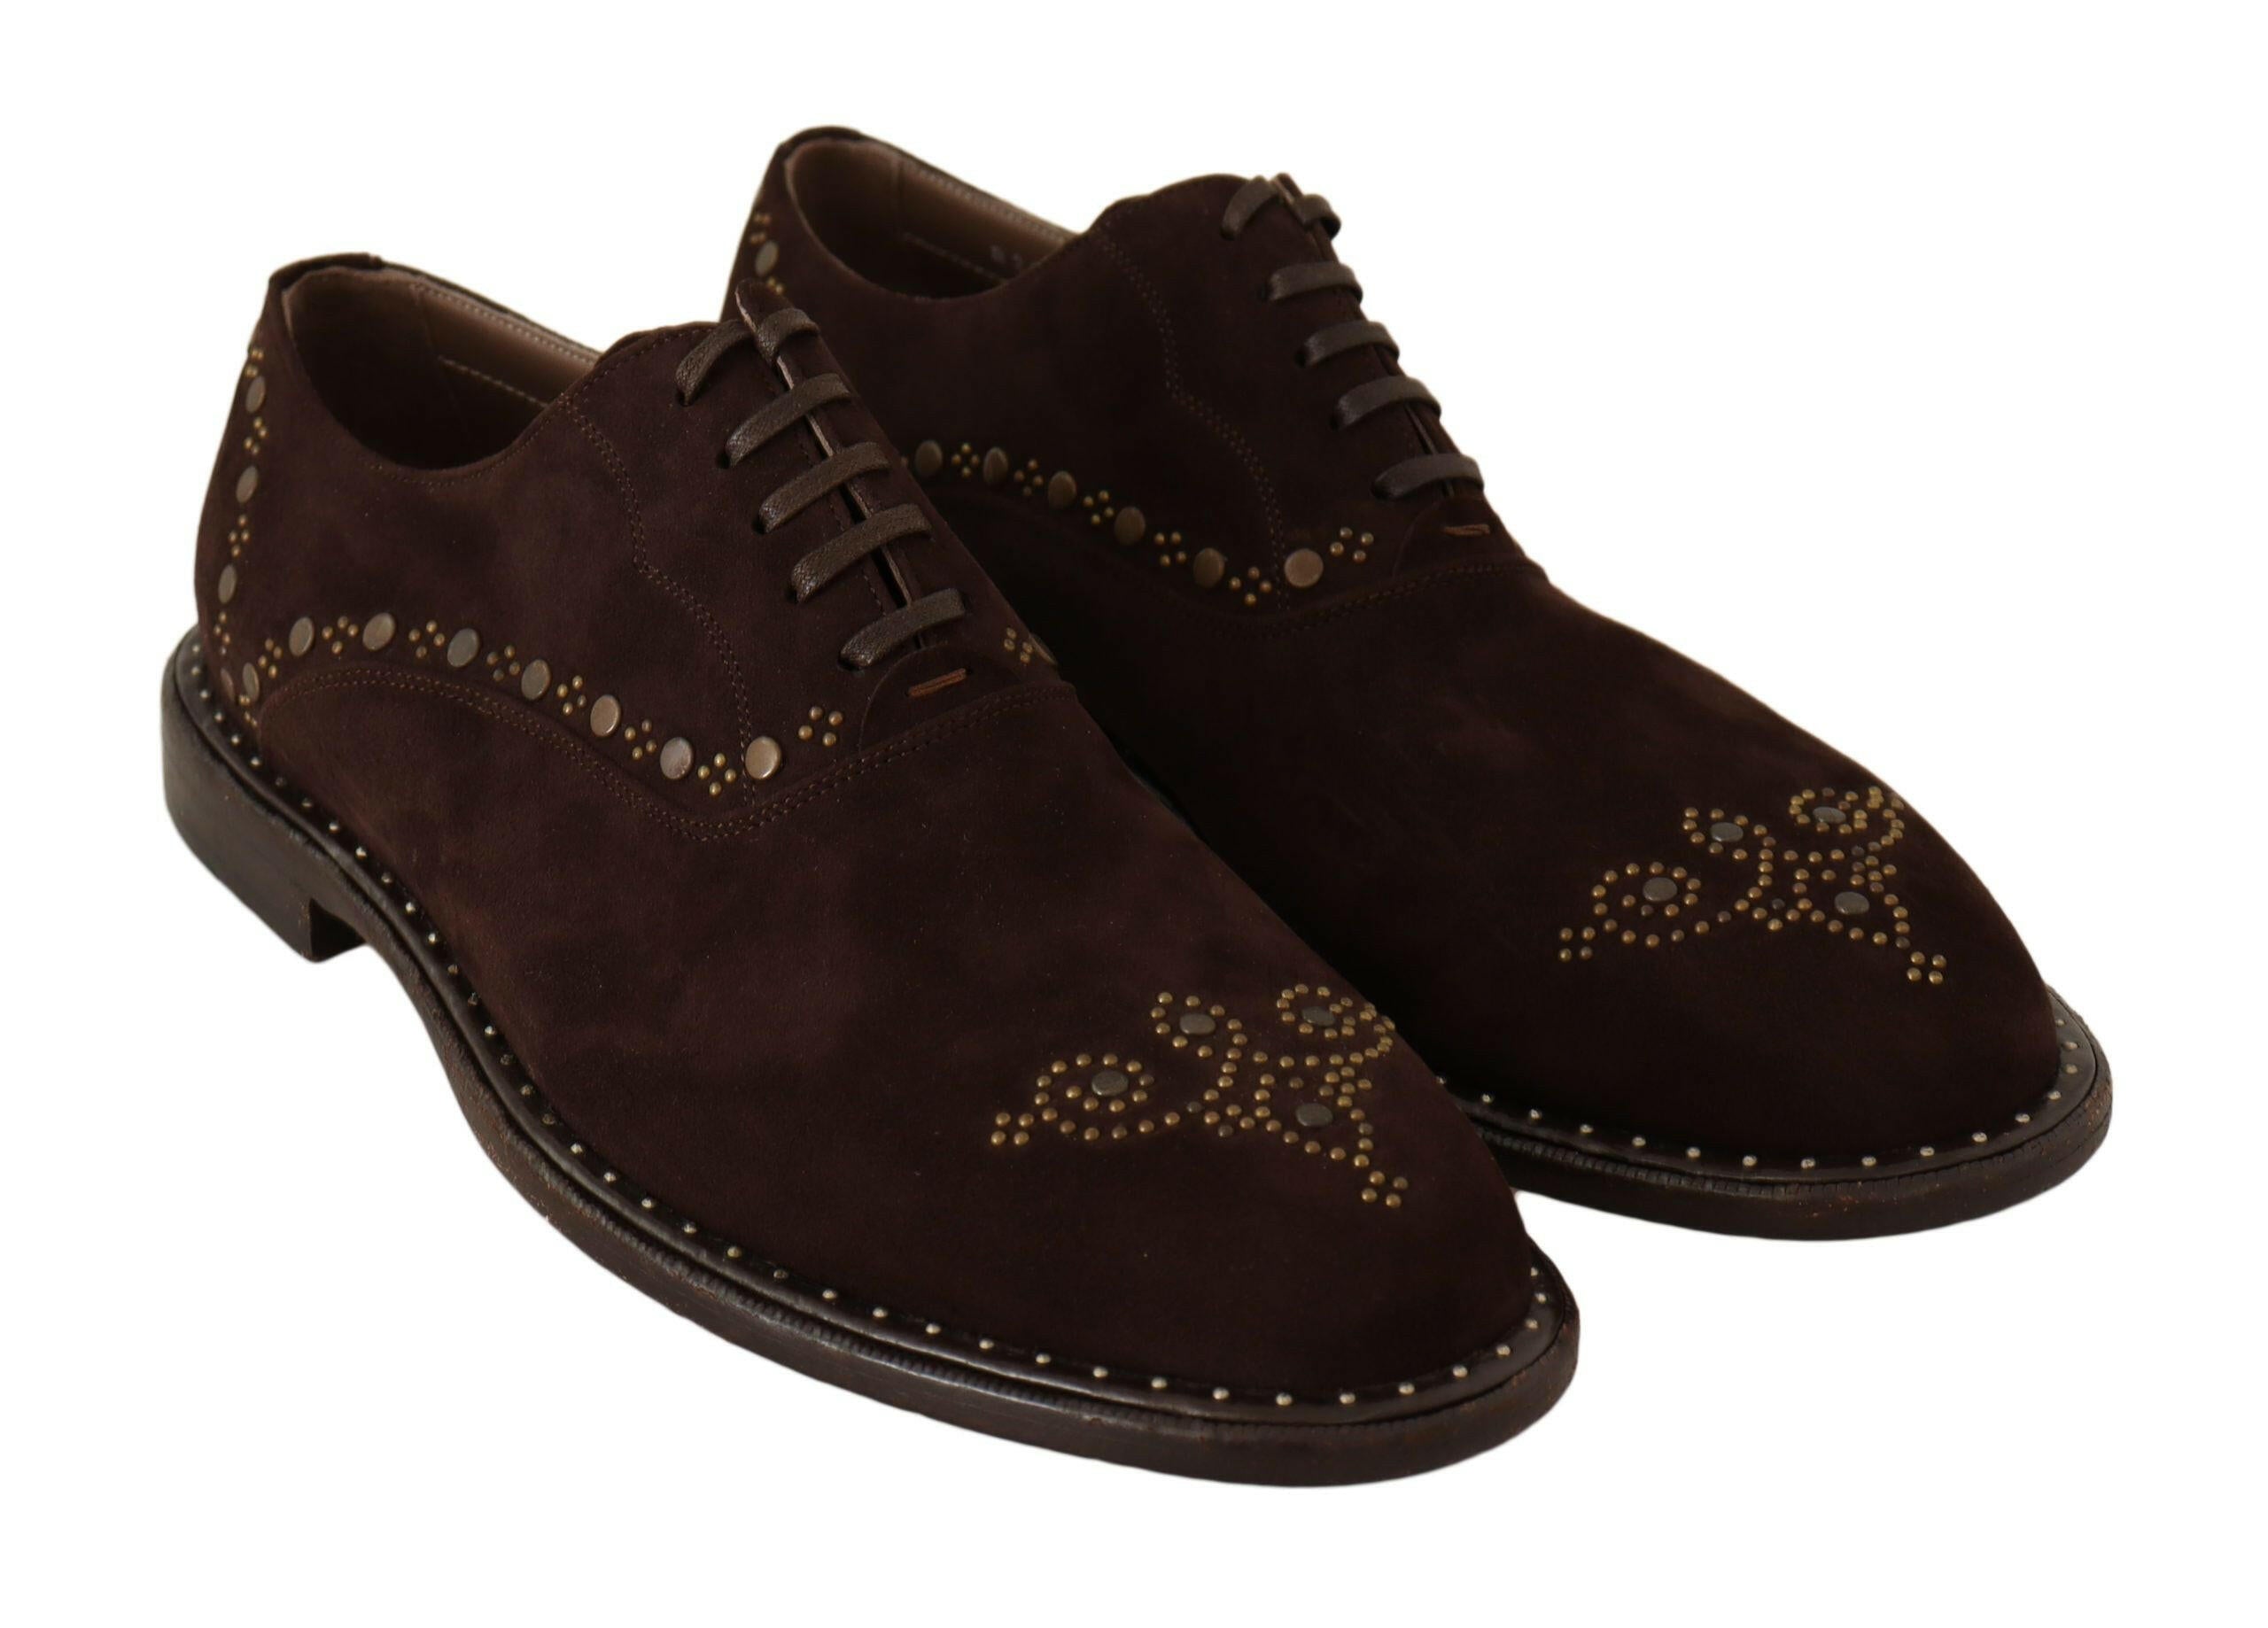 Dolce & Gabbana Brown Suede Marsala Derby Studded Shoes - GENUINE AUTHENTIC BRAND LLC  